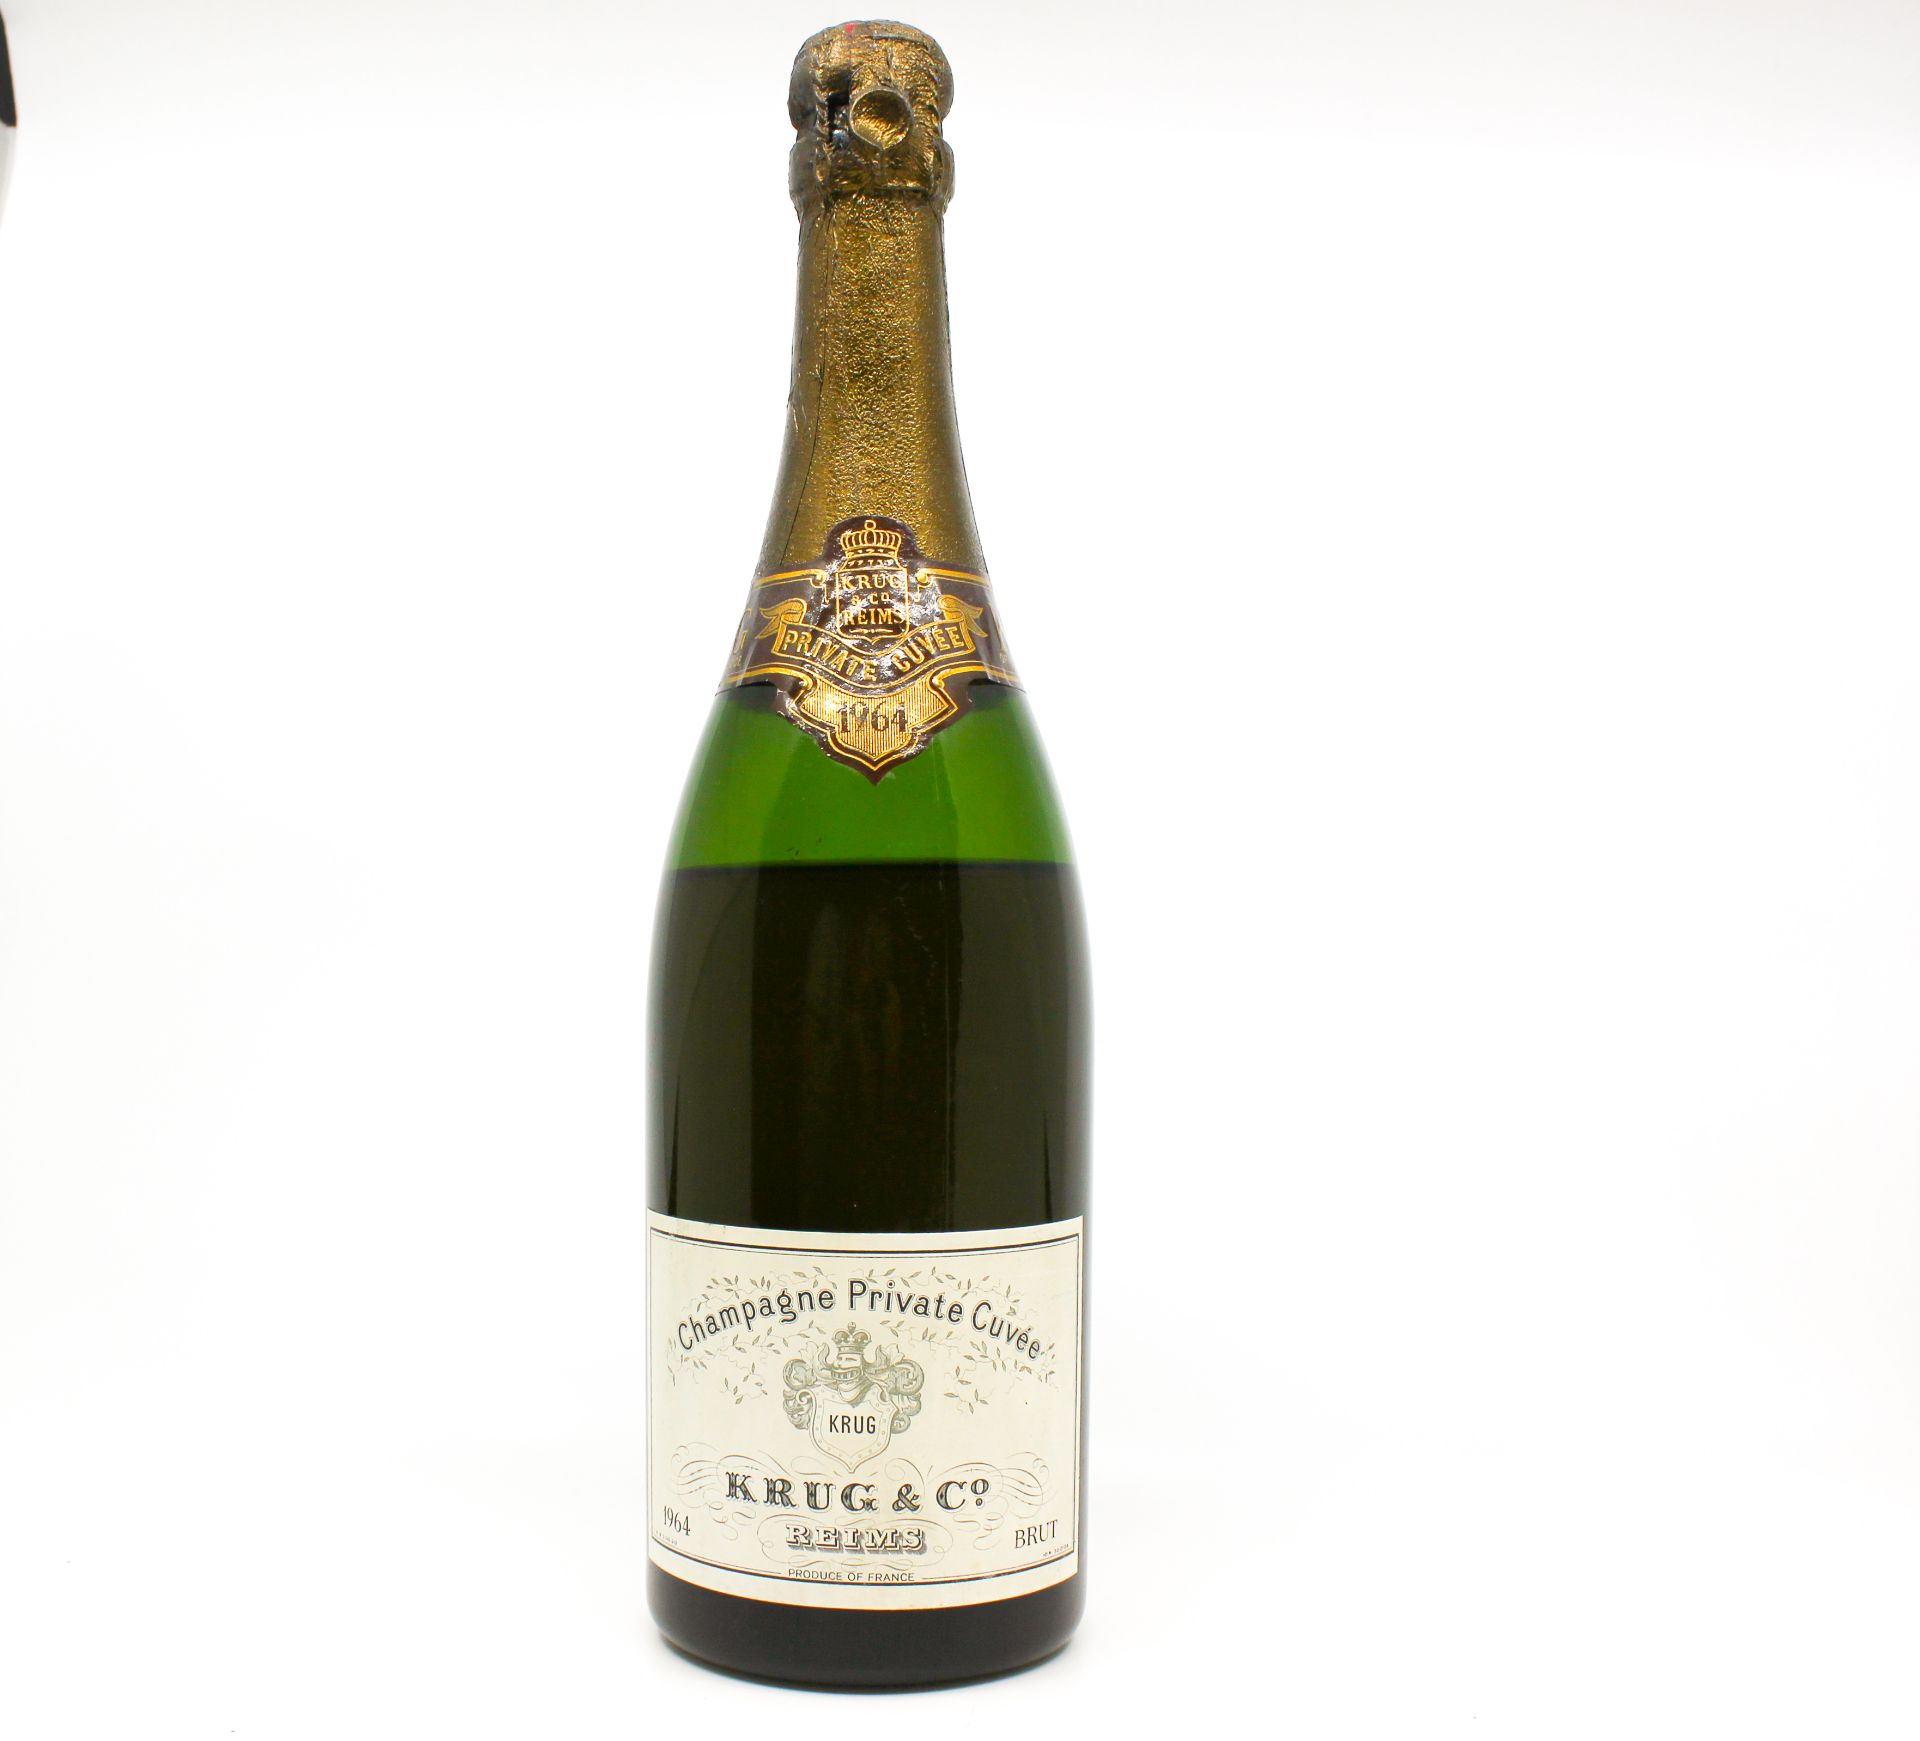 1964 Krug & Co Champagne Private Cuvée - Image 8 of 16